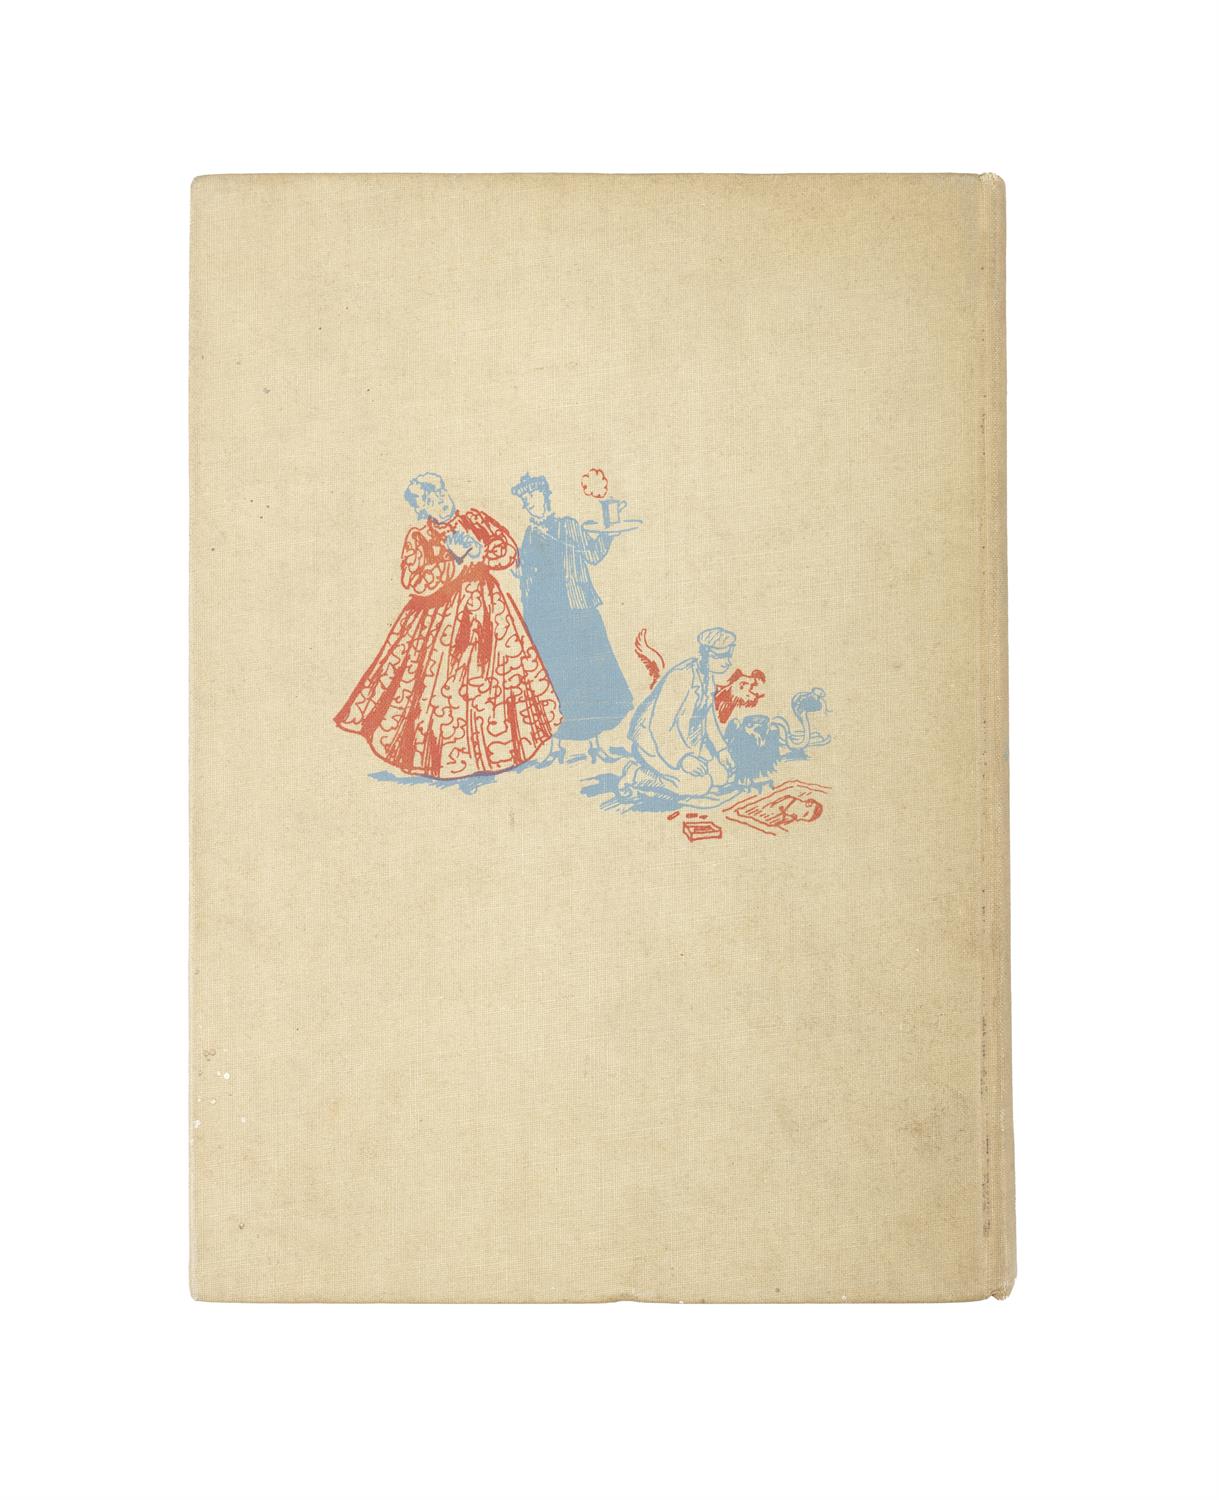 TRAVERS, P.L. [1899-1996]: Mary Poppins and Mary Poppins Comes Back, illustrations by Mary - Image 2 of 9